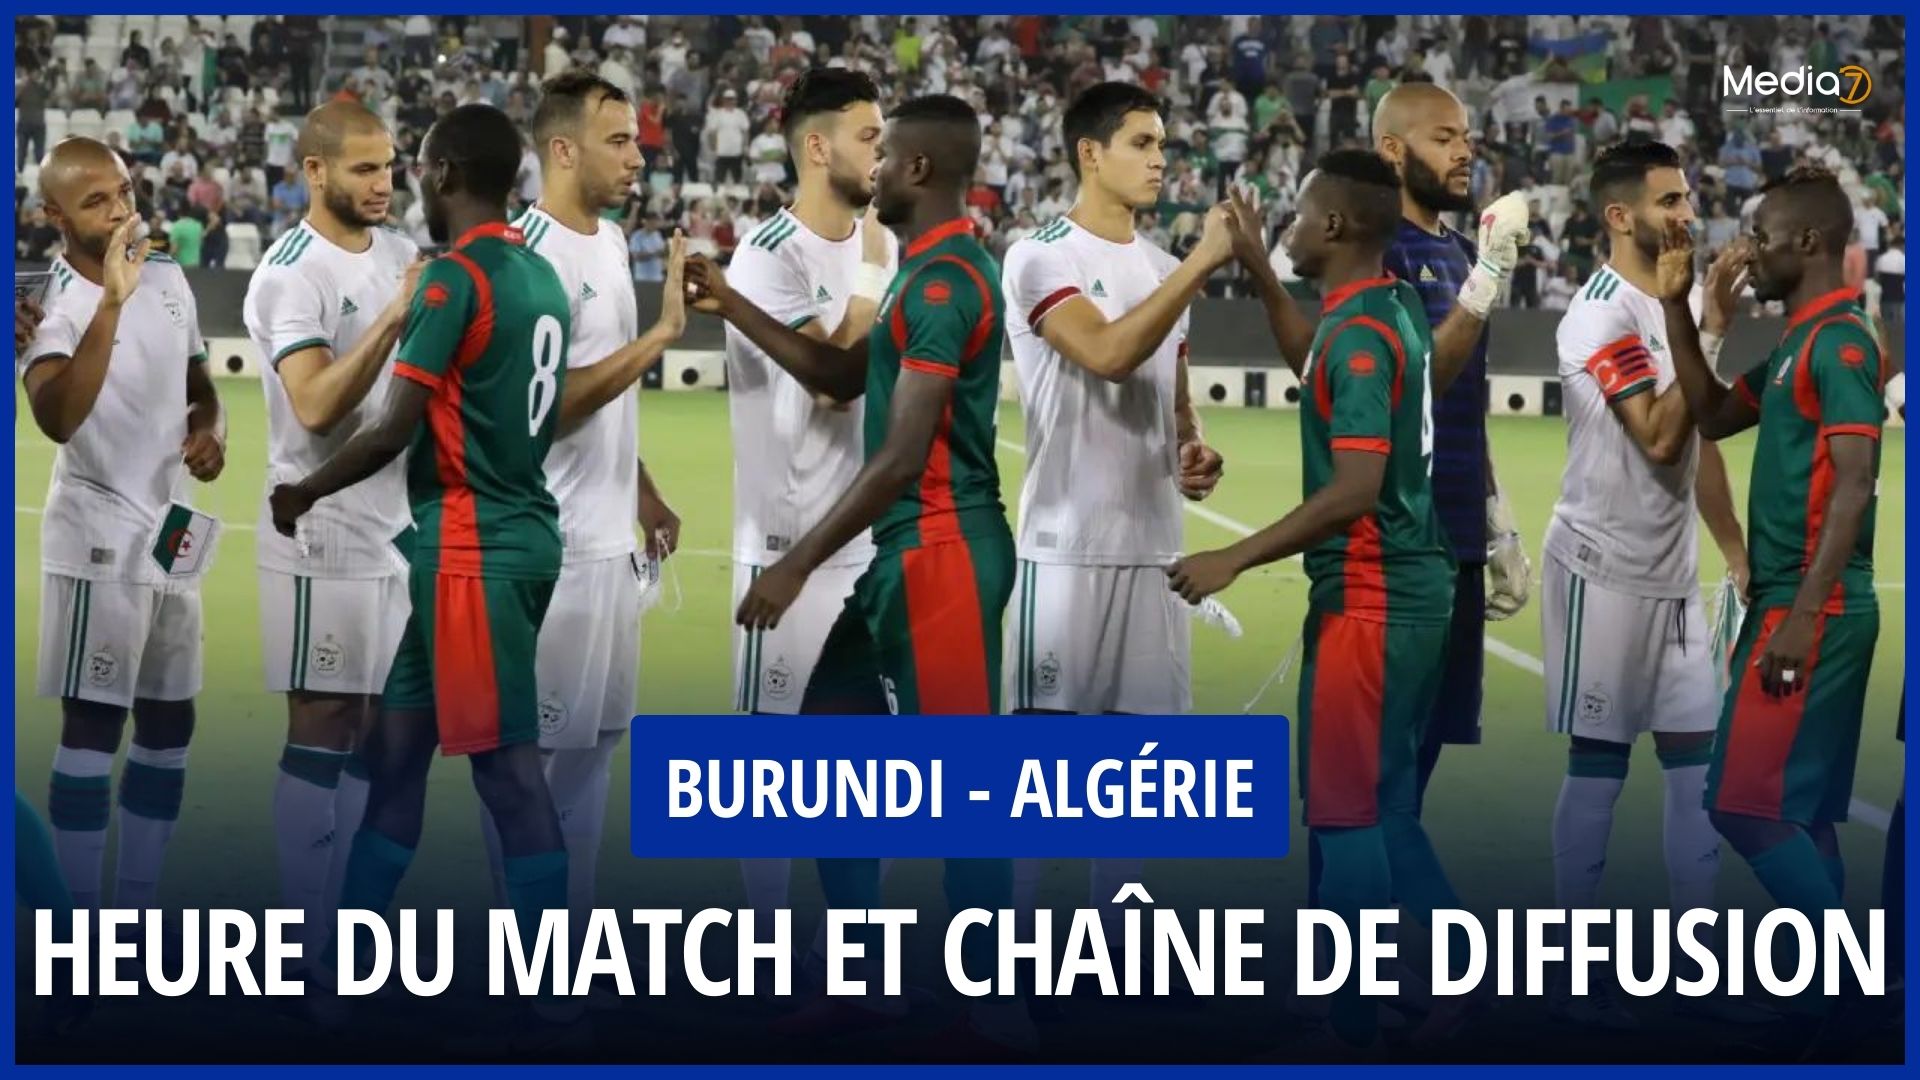 Burundi – Algeria live: What time? On which TV channel to watch the match? - Media7